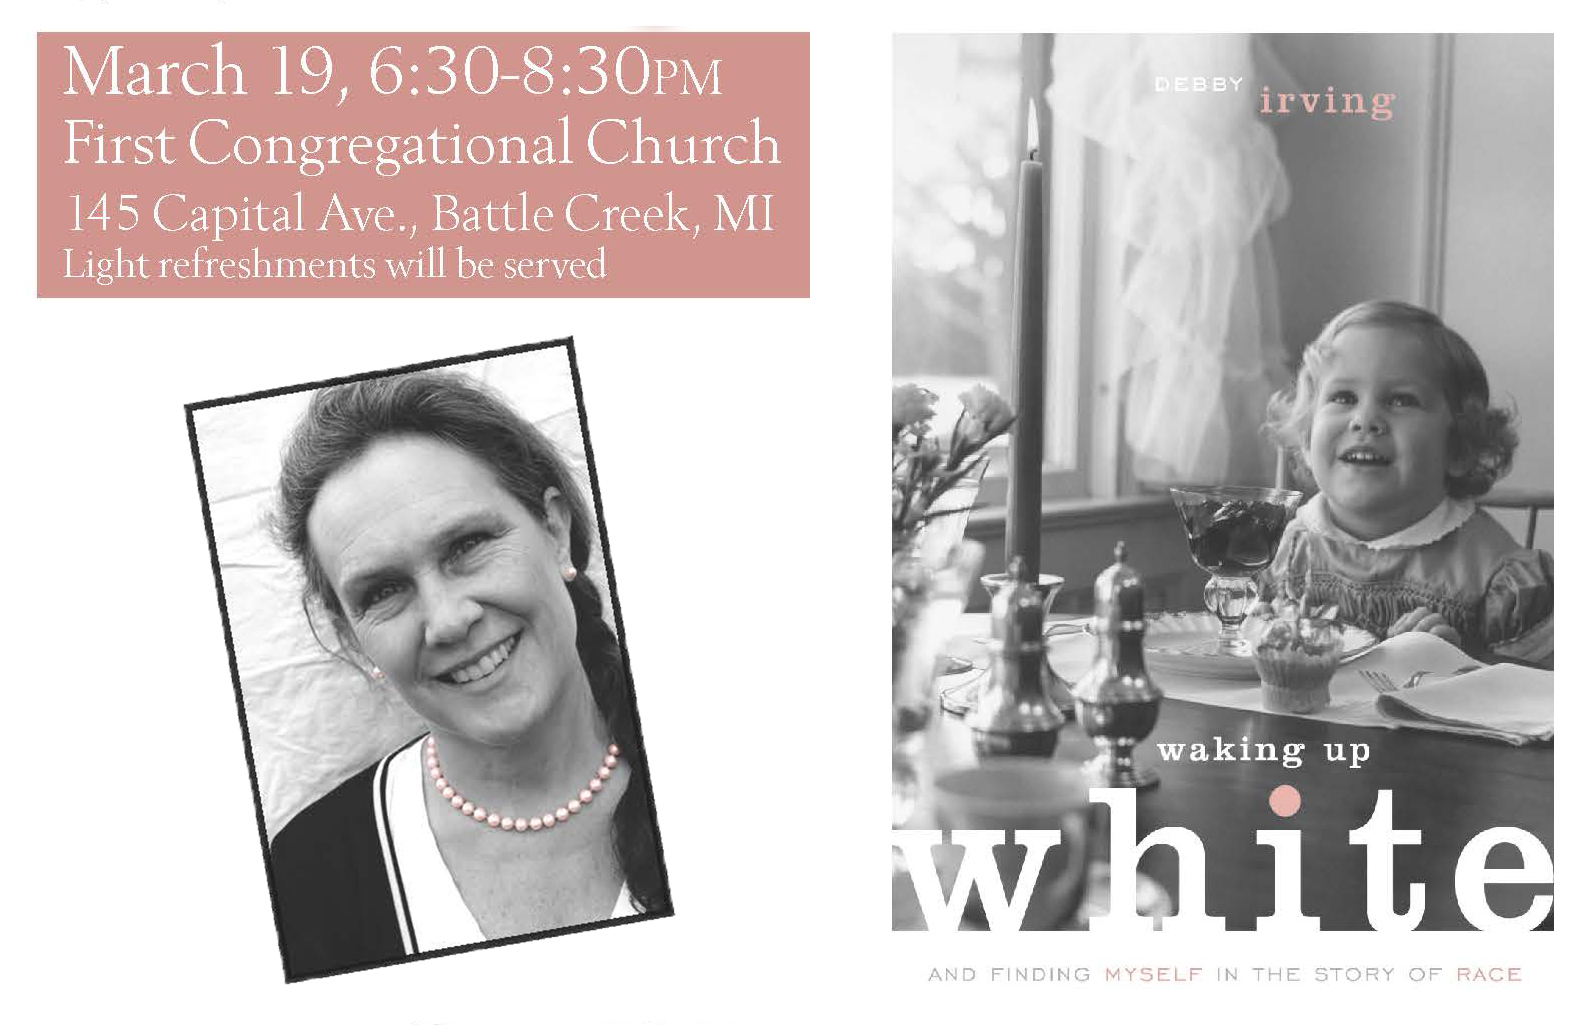 A text and graphic image to promote an upcoming "Waking Up White" event , including an author photo and an image of the book cover.